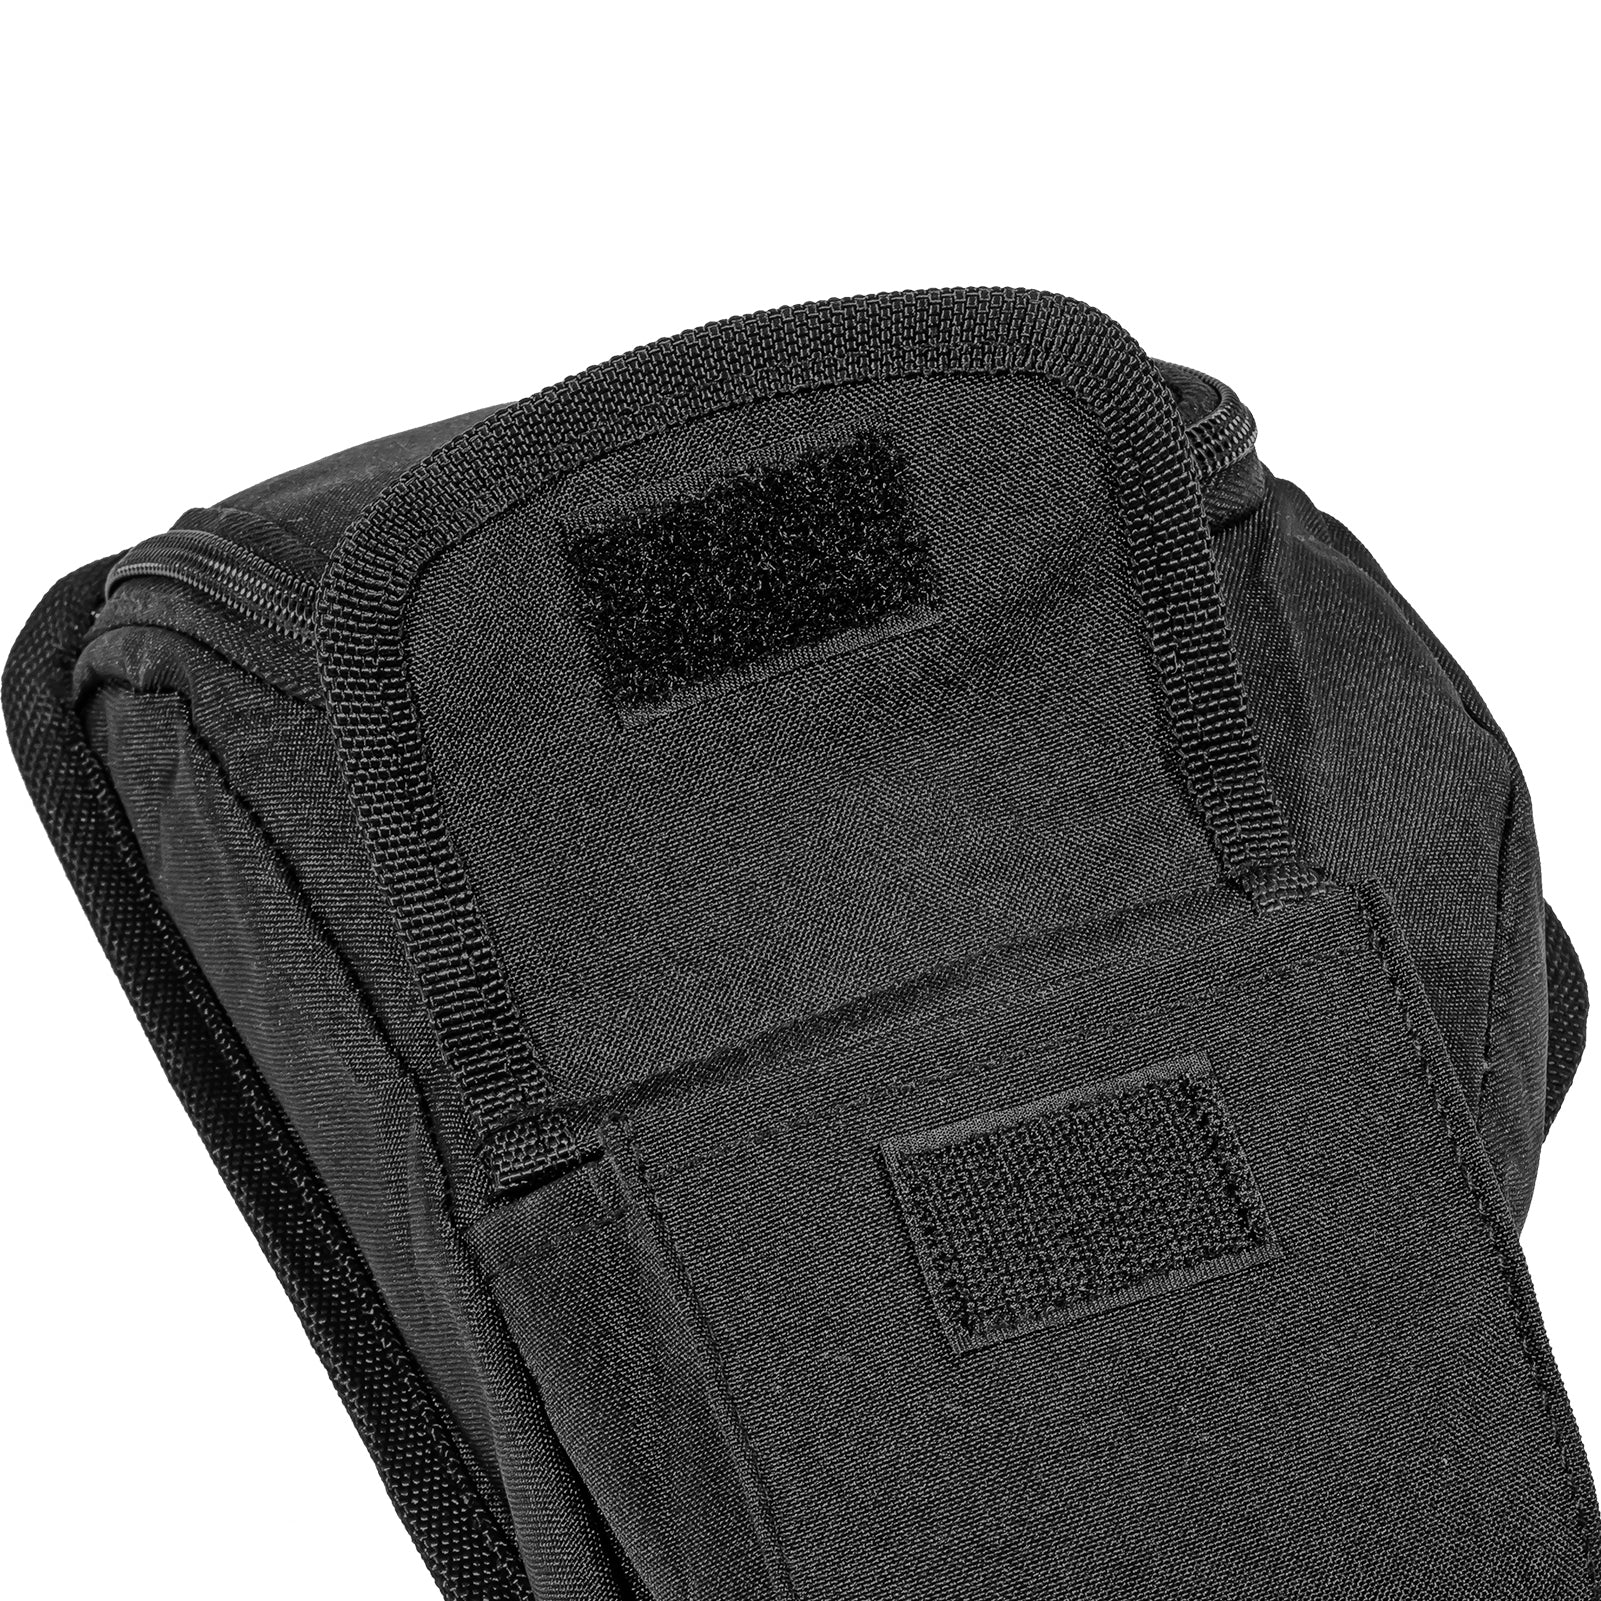 93-13 Harley Touring Road King Saddlebag Lid Organizer Pouch Maximize Space-4